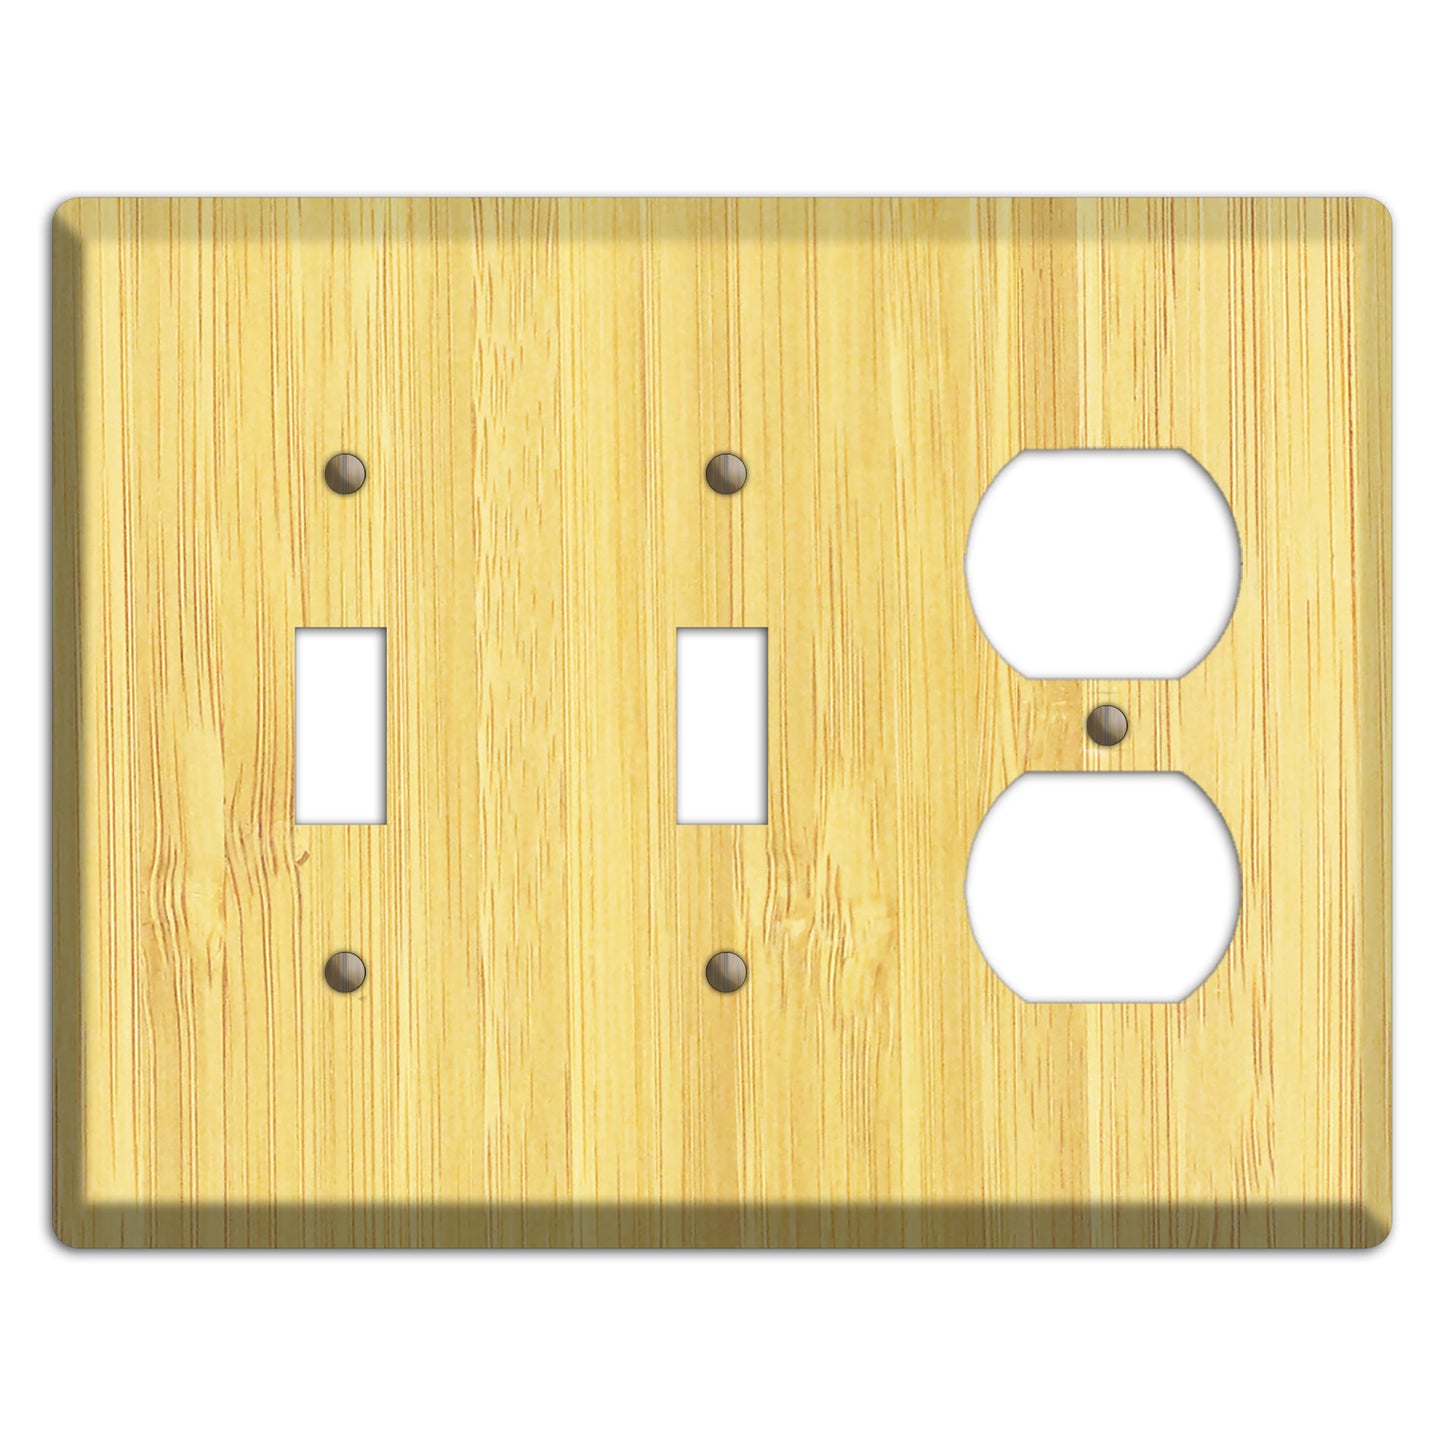 Natural Bamboo Wood 2 Toggle / Duplex Outlet Cover Plate